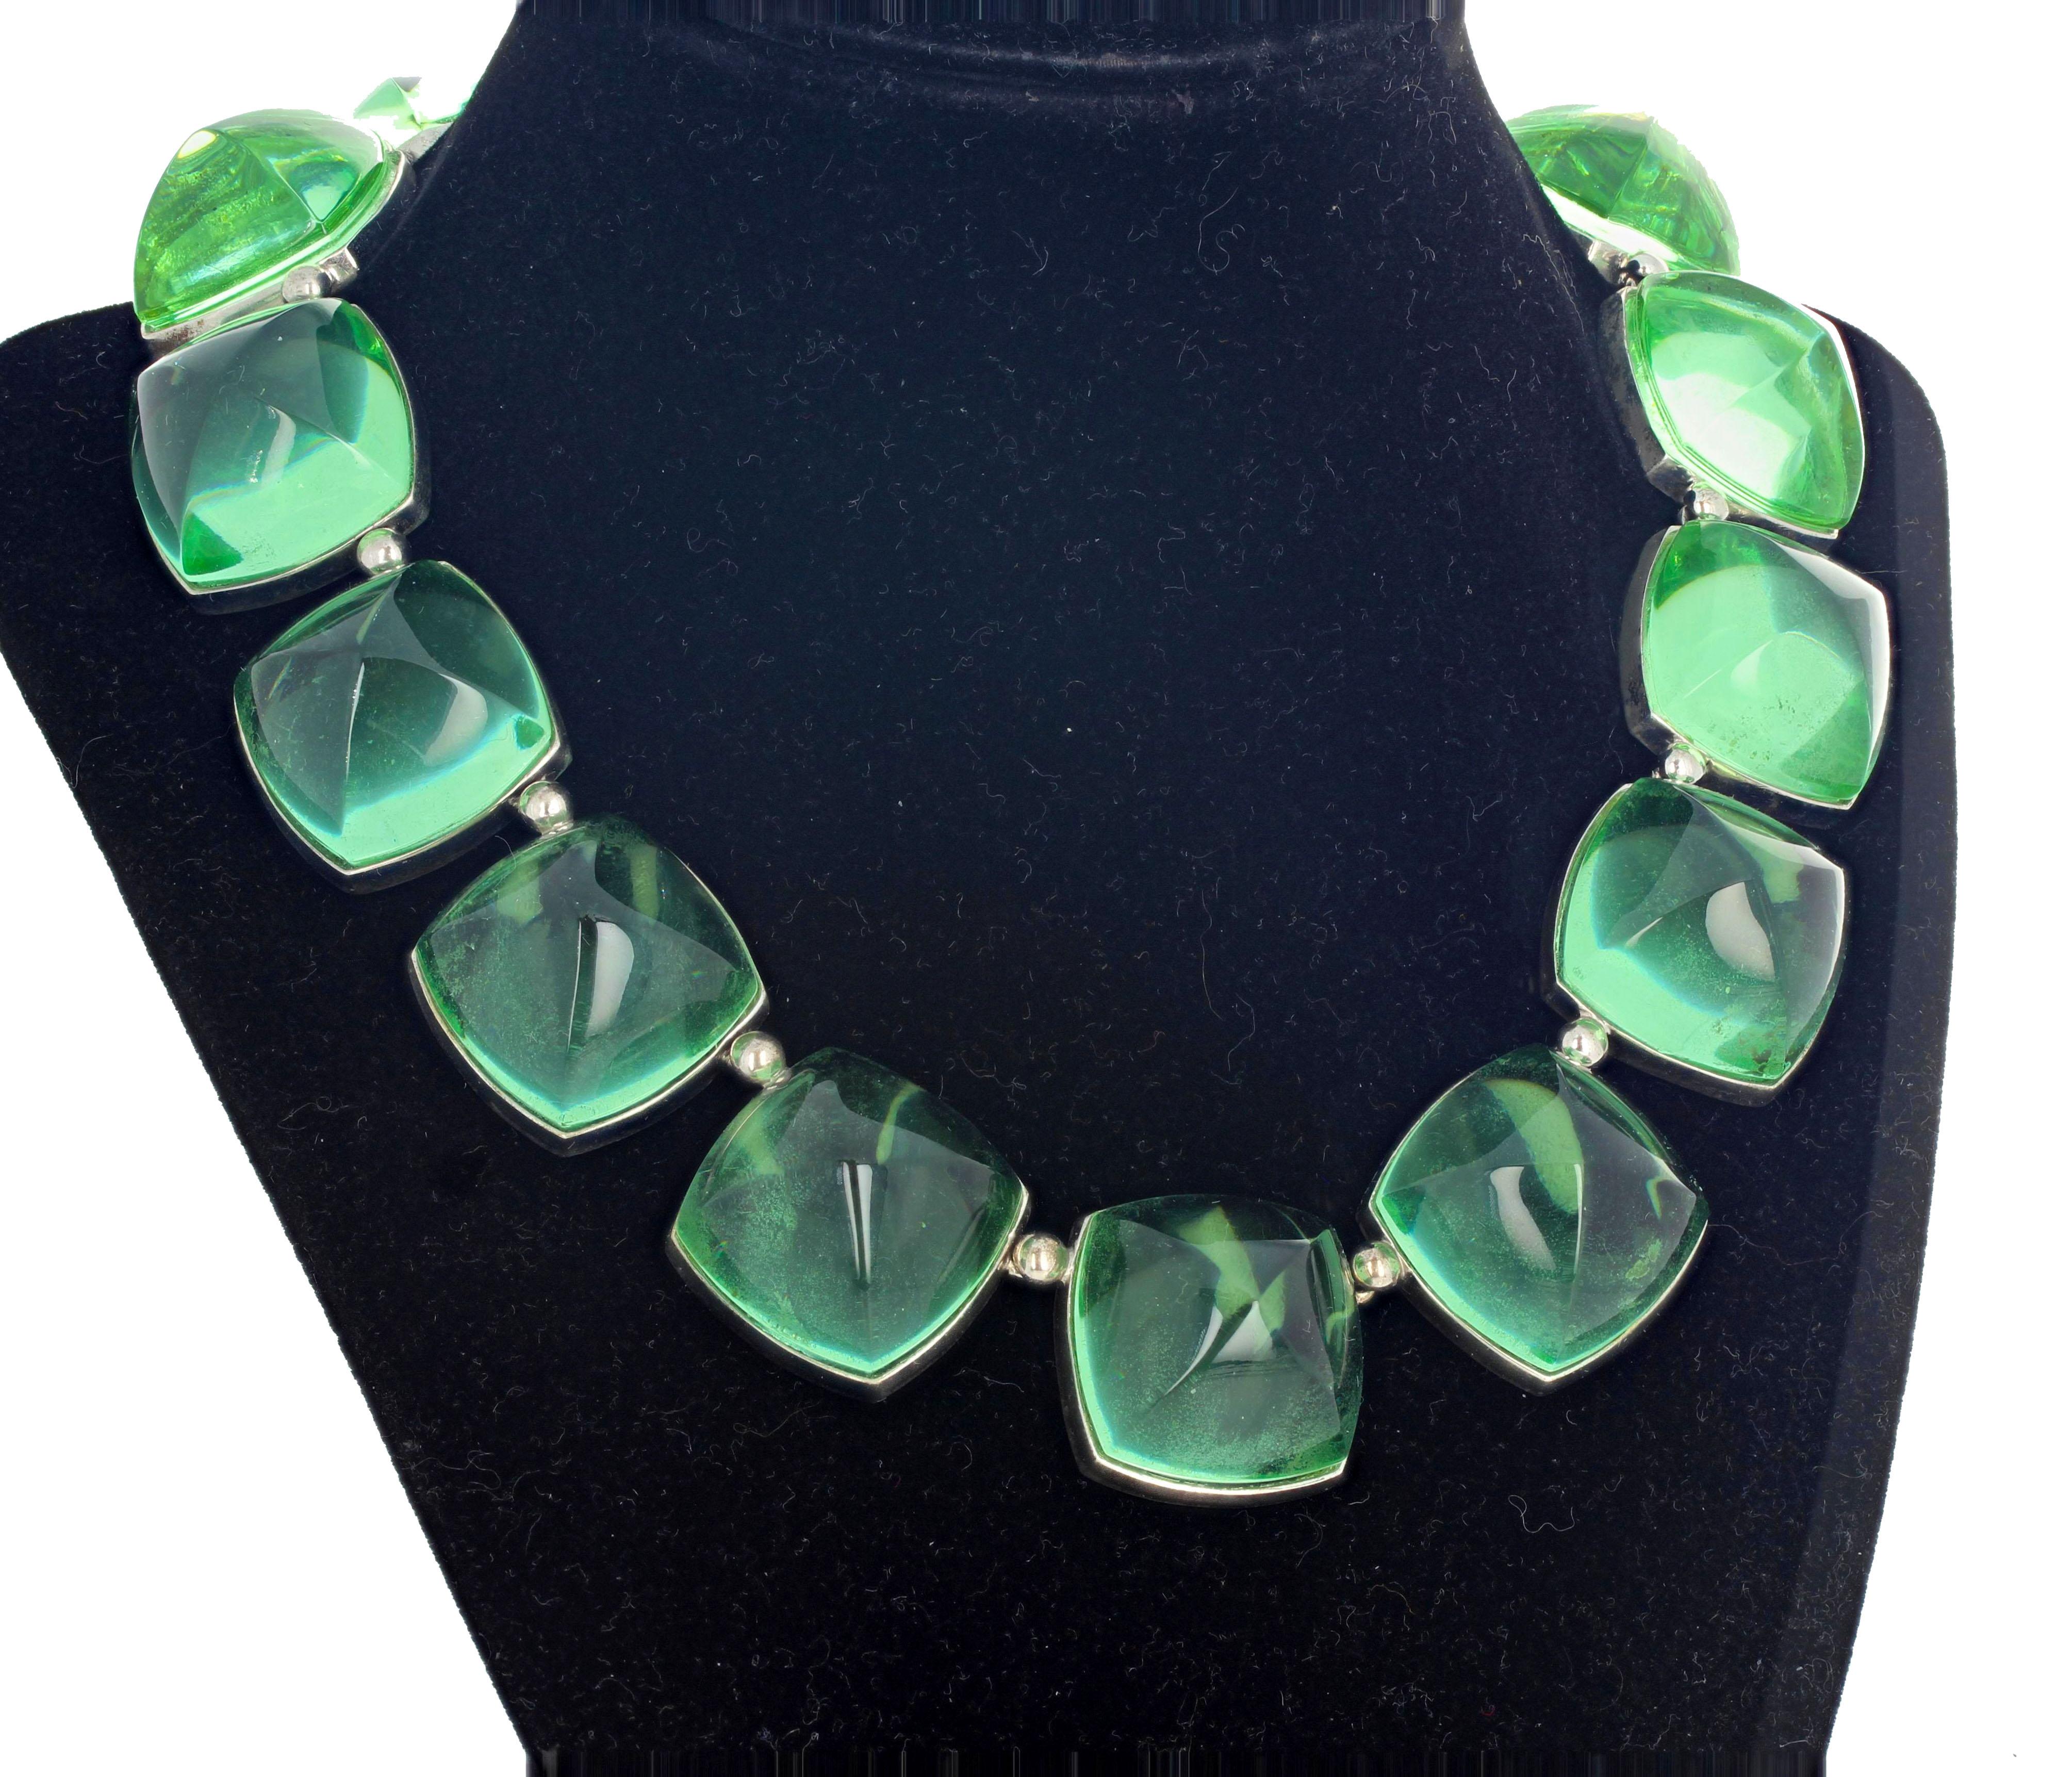 Gorgeous glittering green Baccarat necklace set in Sterling Silver - 16